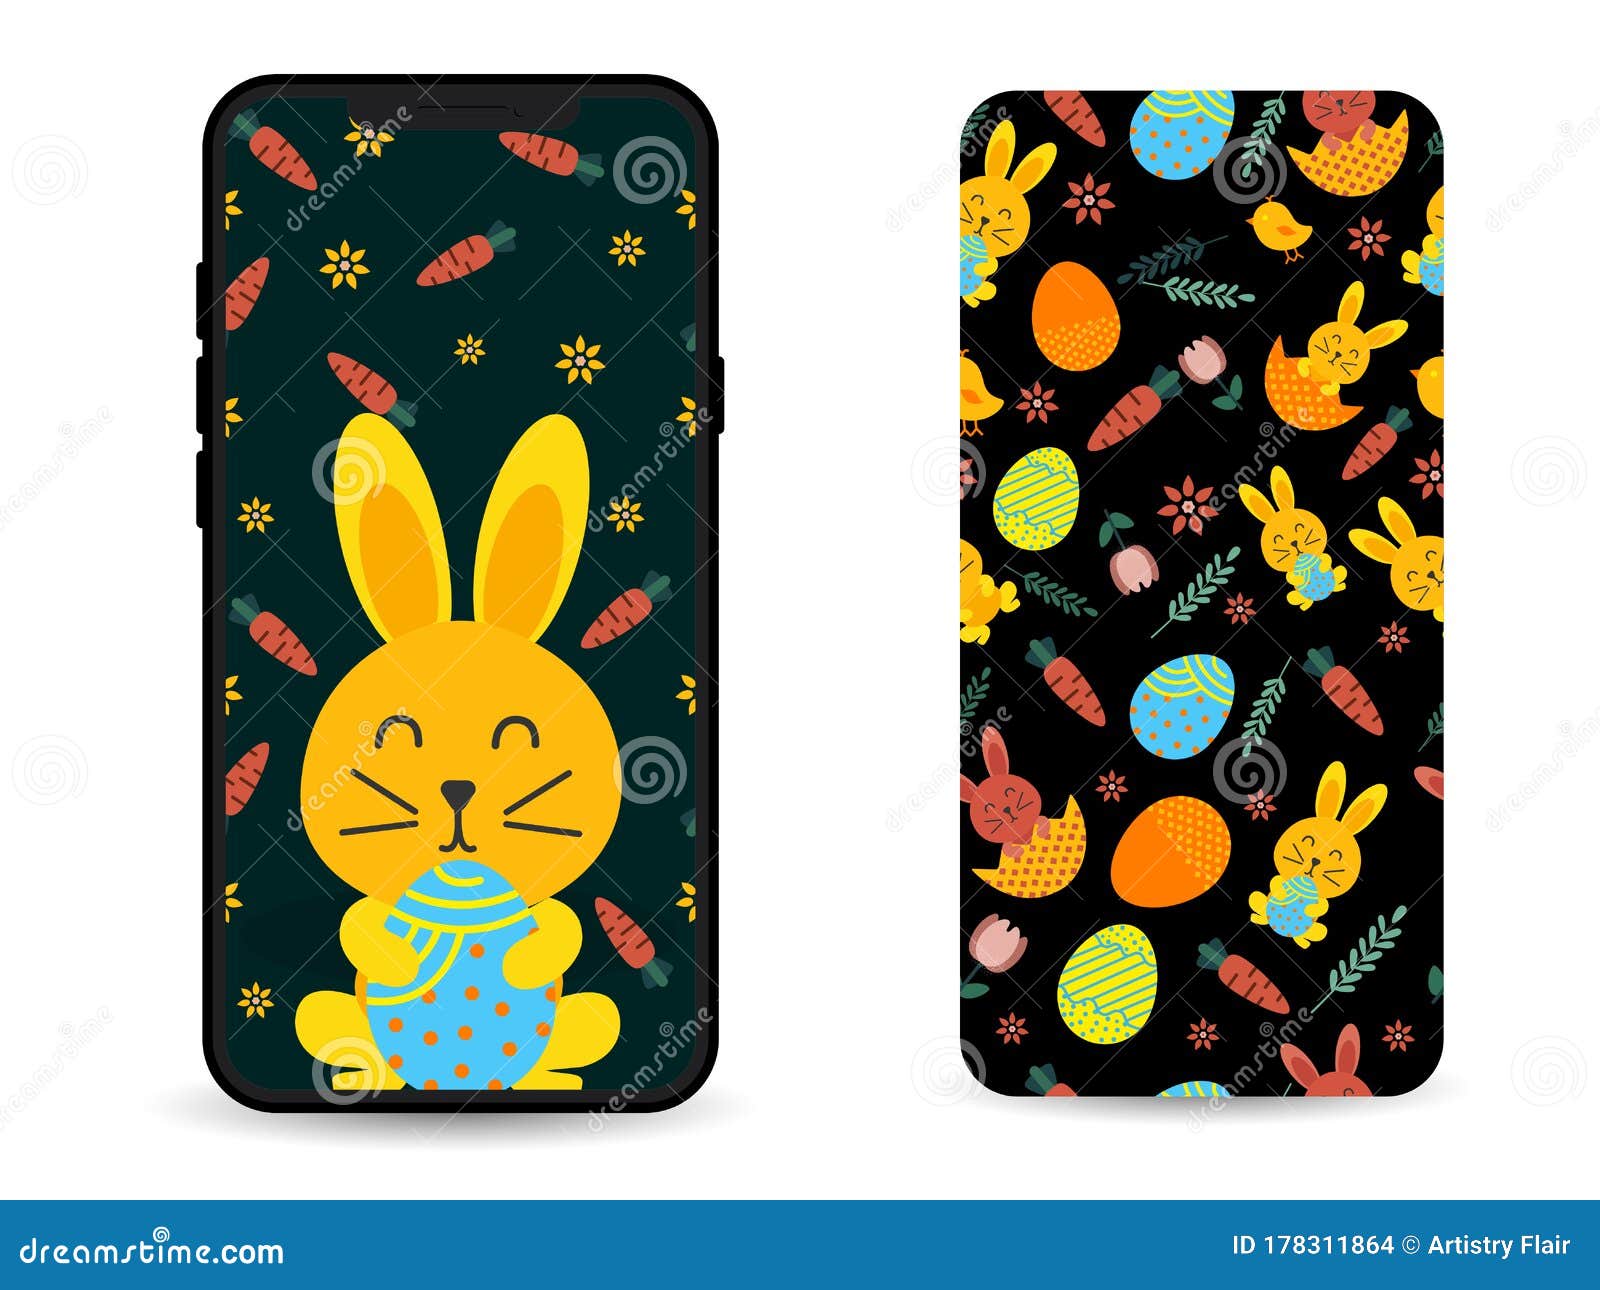 Happy Easter Wallpaper and Mobile Cover Design for New Generation. Doodle  Seamless Pattern Background Stock Vector - Illustration of leaf, gift:  178311864